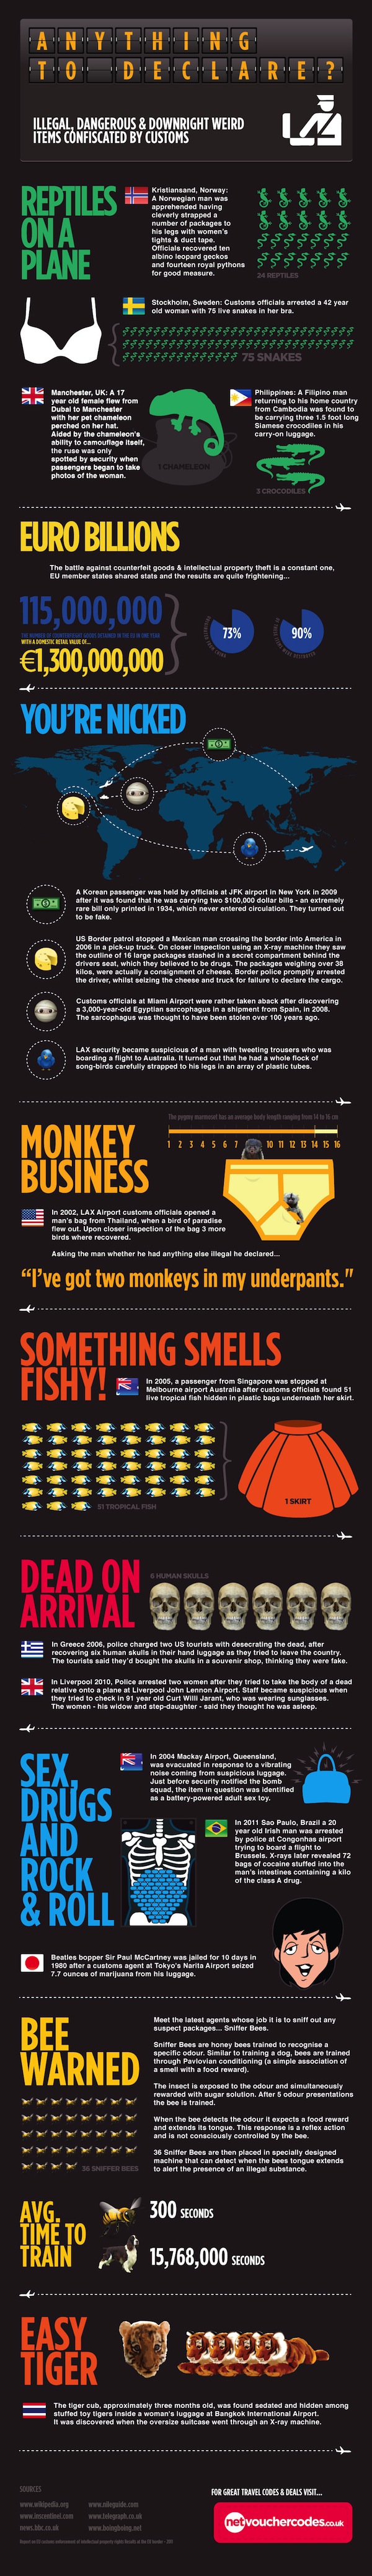 Anything to Declare Customs Infographic